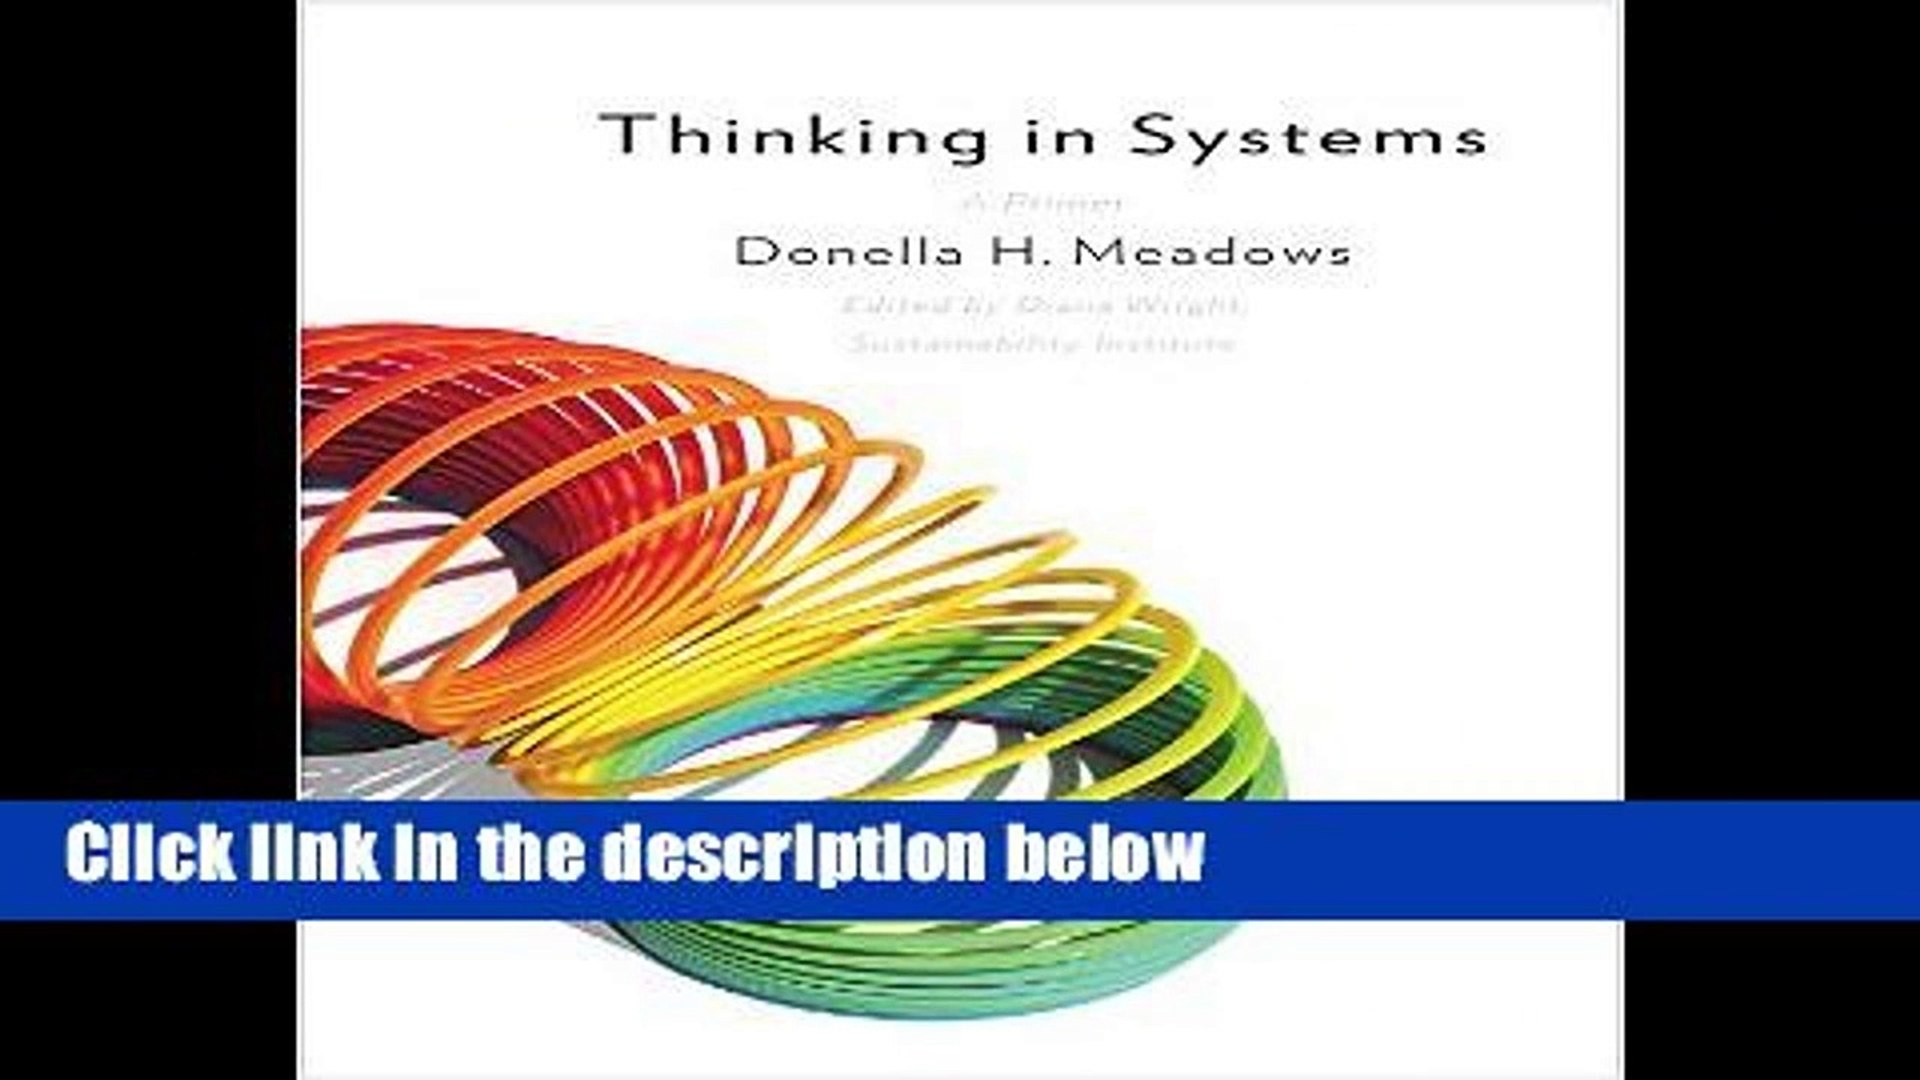 donella meadows thinking in systems a primer pdf